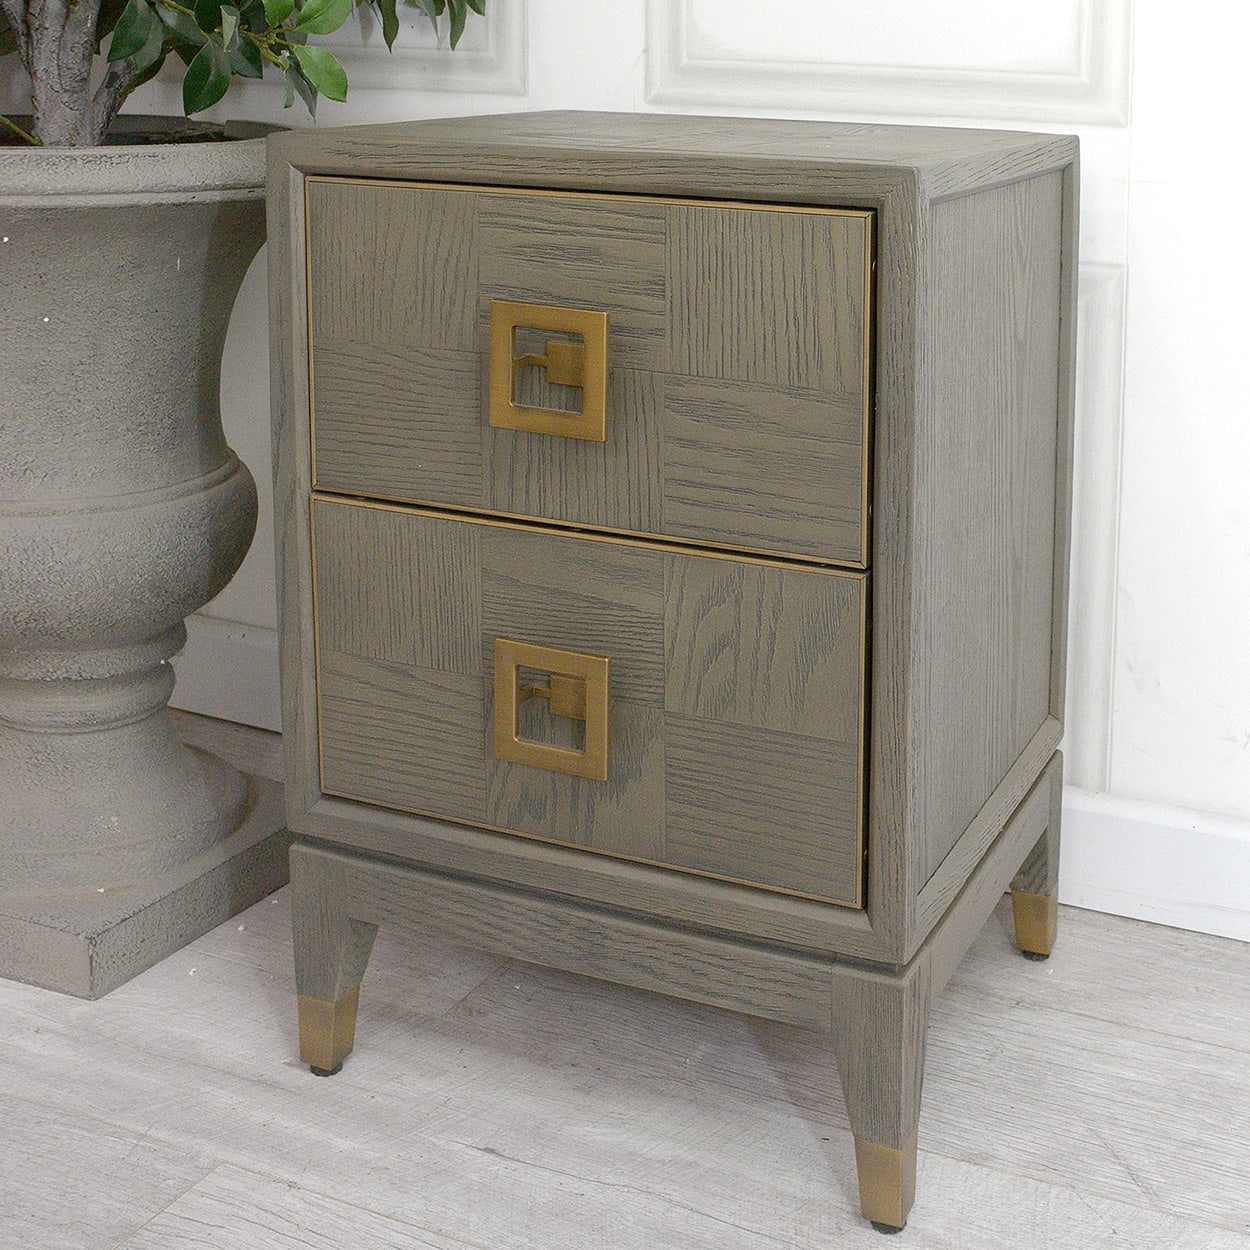 Astor Squares Bedside Table from the Boho Furniture Collection